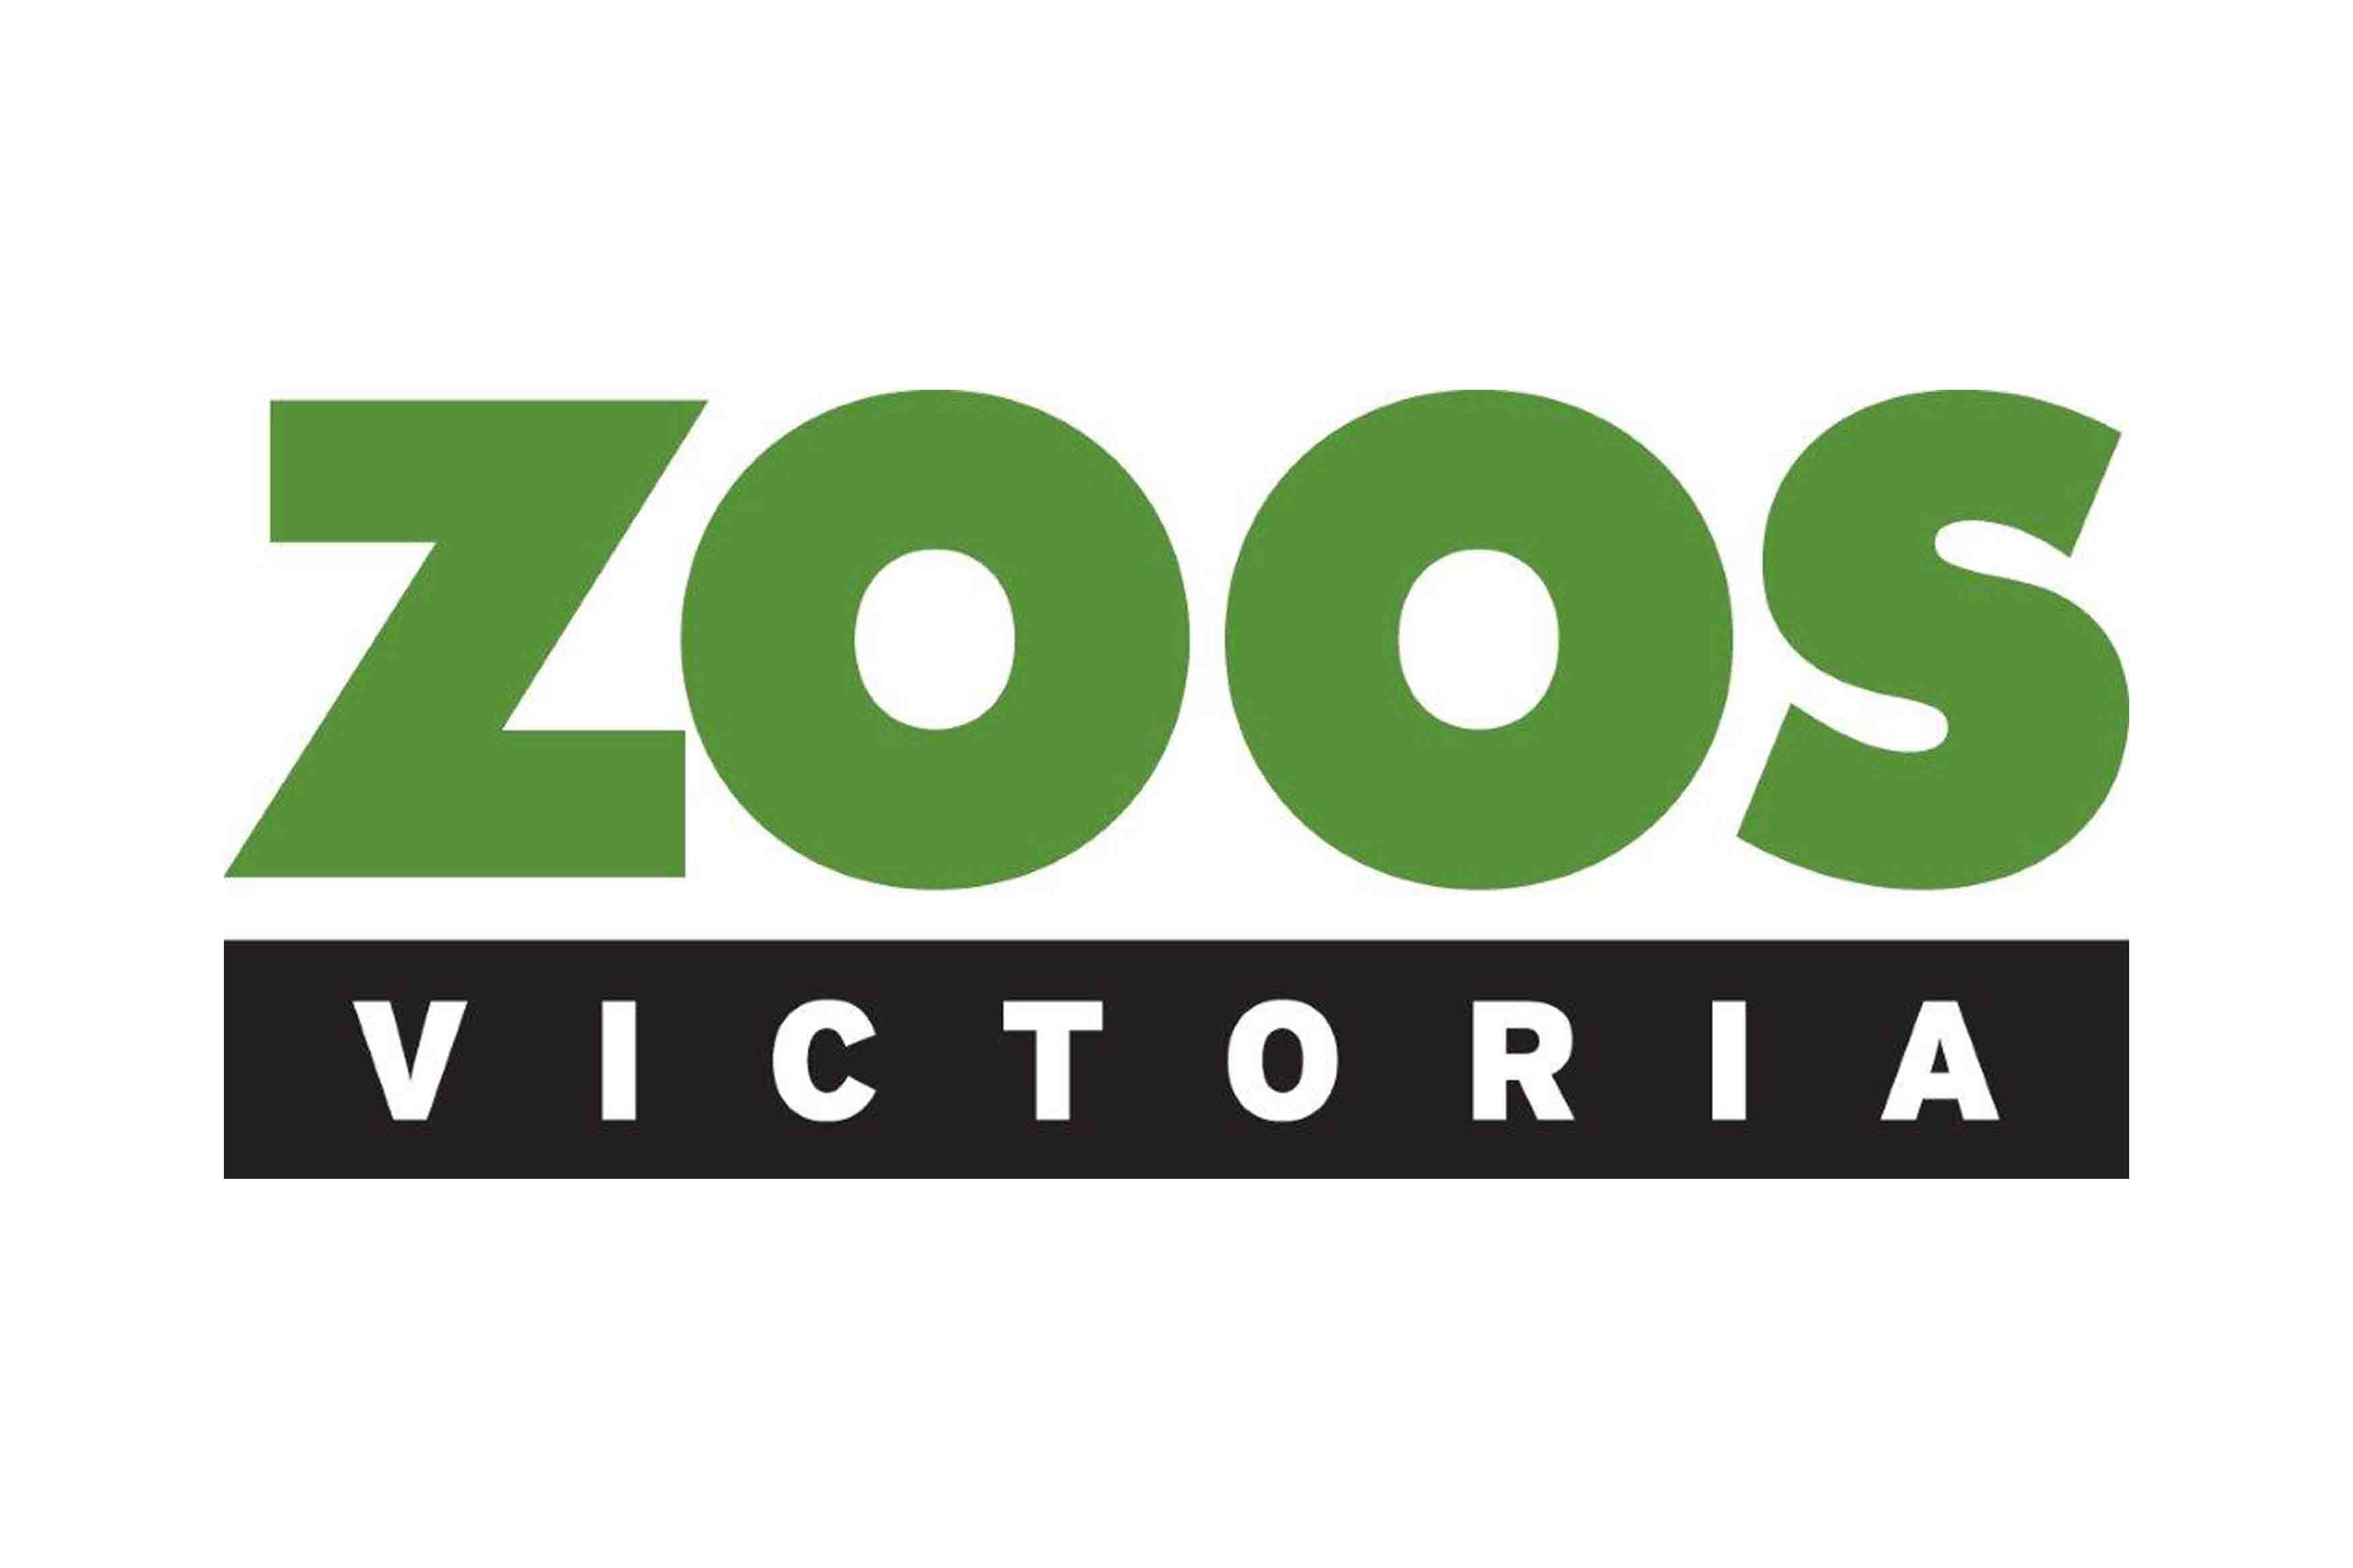 Zoos in Victoria are Bringing the Zoos to You at Home